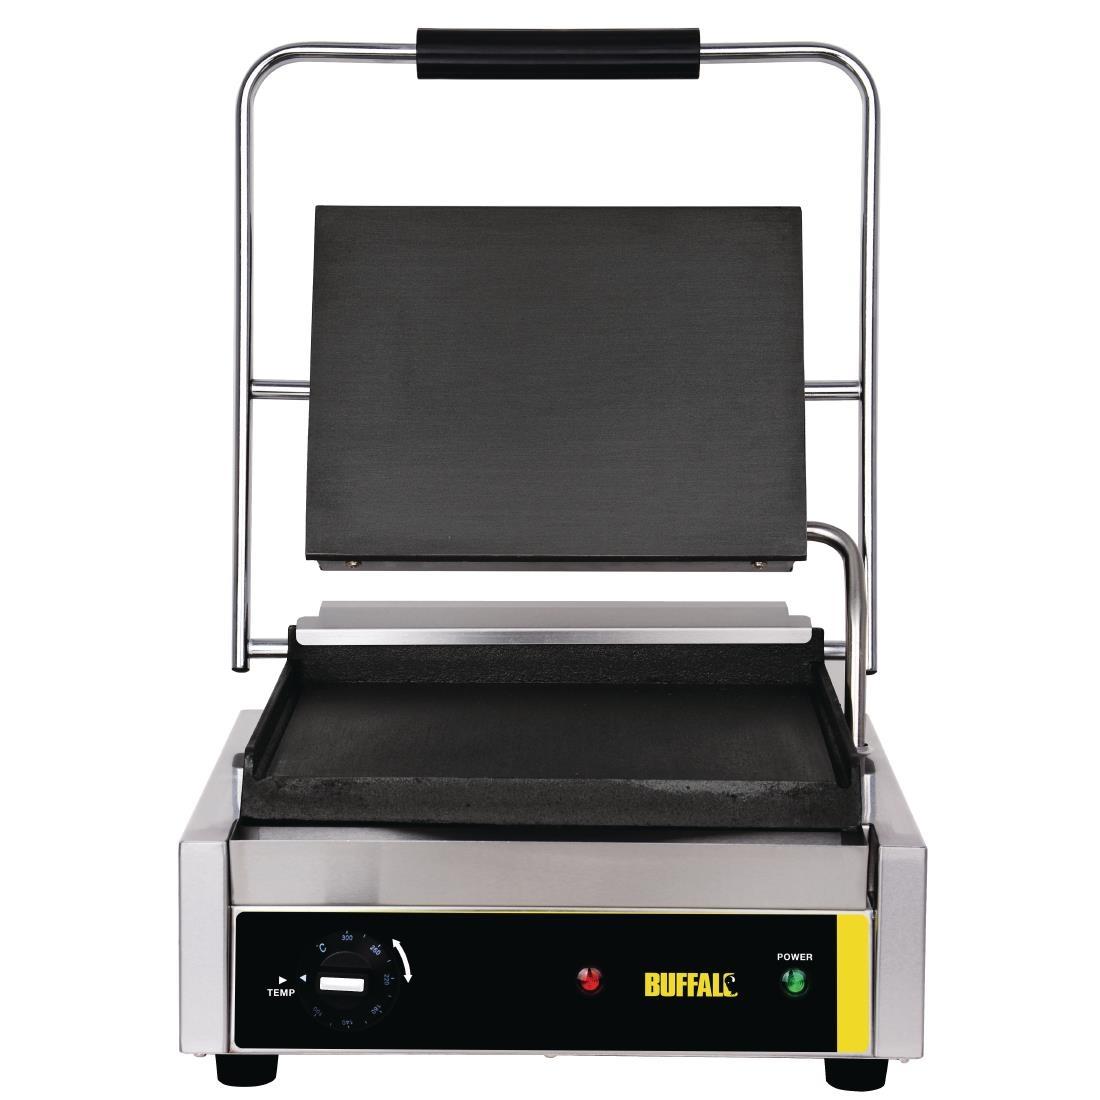 Buffalo Bistro Contact Grill Large Flat - GJ455  - 3